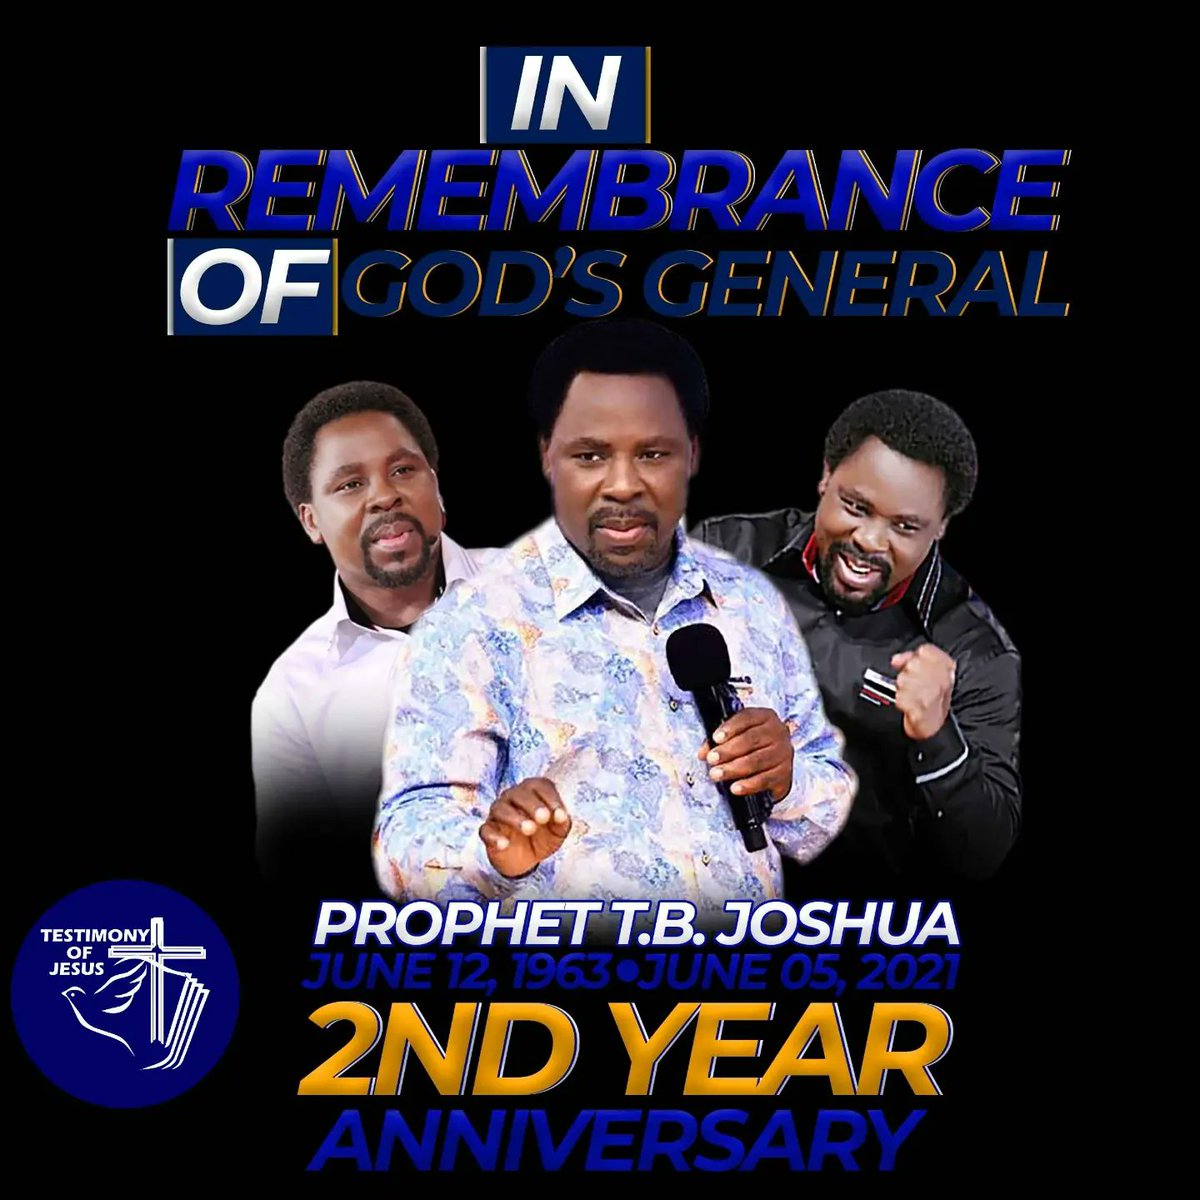 THE 2ND ANNIVERSARY OF OUR DEAR FATHER SENIOR PROPHET TB JOSHUA. 
WORDS ARE NOT ENOUGH TO EXPRESS HOW GOD USE YOU TO CHANGE MANY LIVES AROUND THE WORLD. 
#TBJoshua #TestimonyOfJesusChannel #scoan #emmanueltv #ApostlePeterJohnGabriel #TestimonyOfJesus #tojim